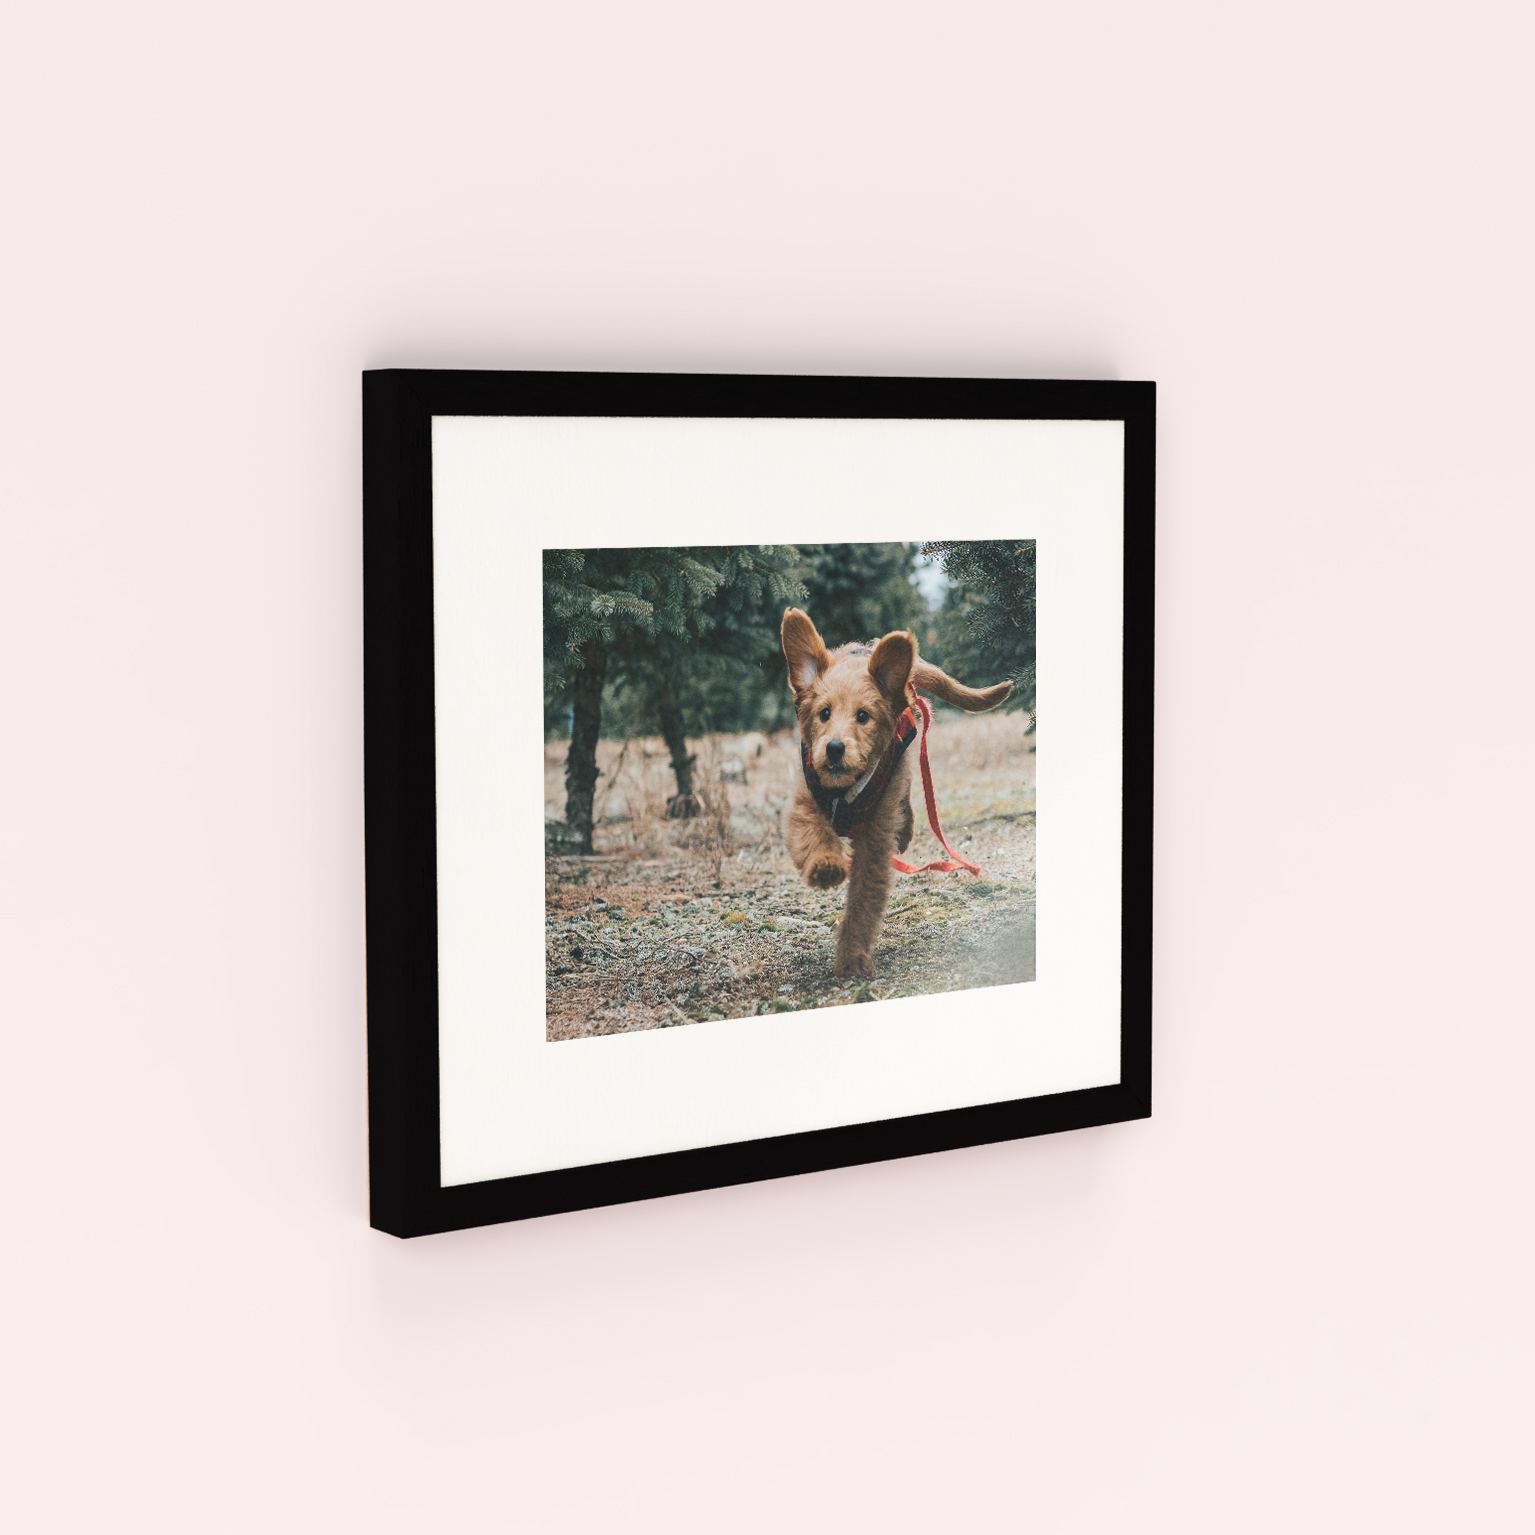 Little Landscape Framed Photo Print - Capture and preserve cherished memories with enduring acrylic glass design.